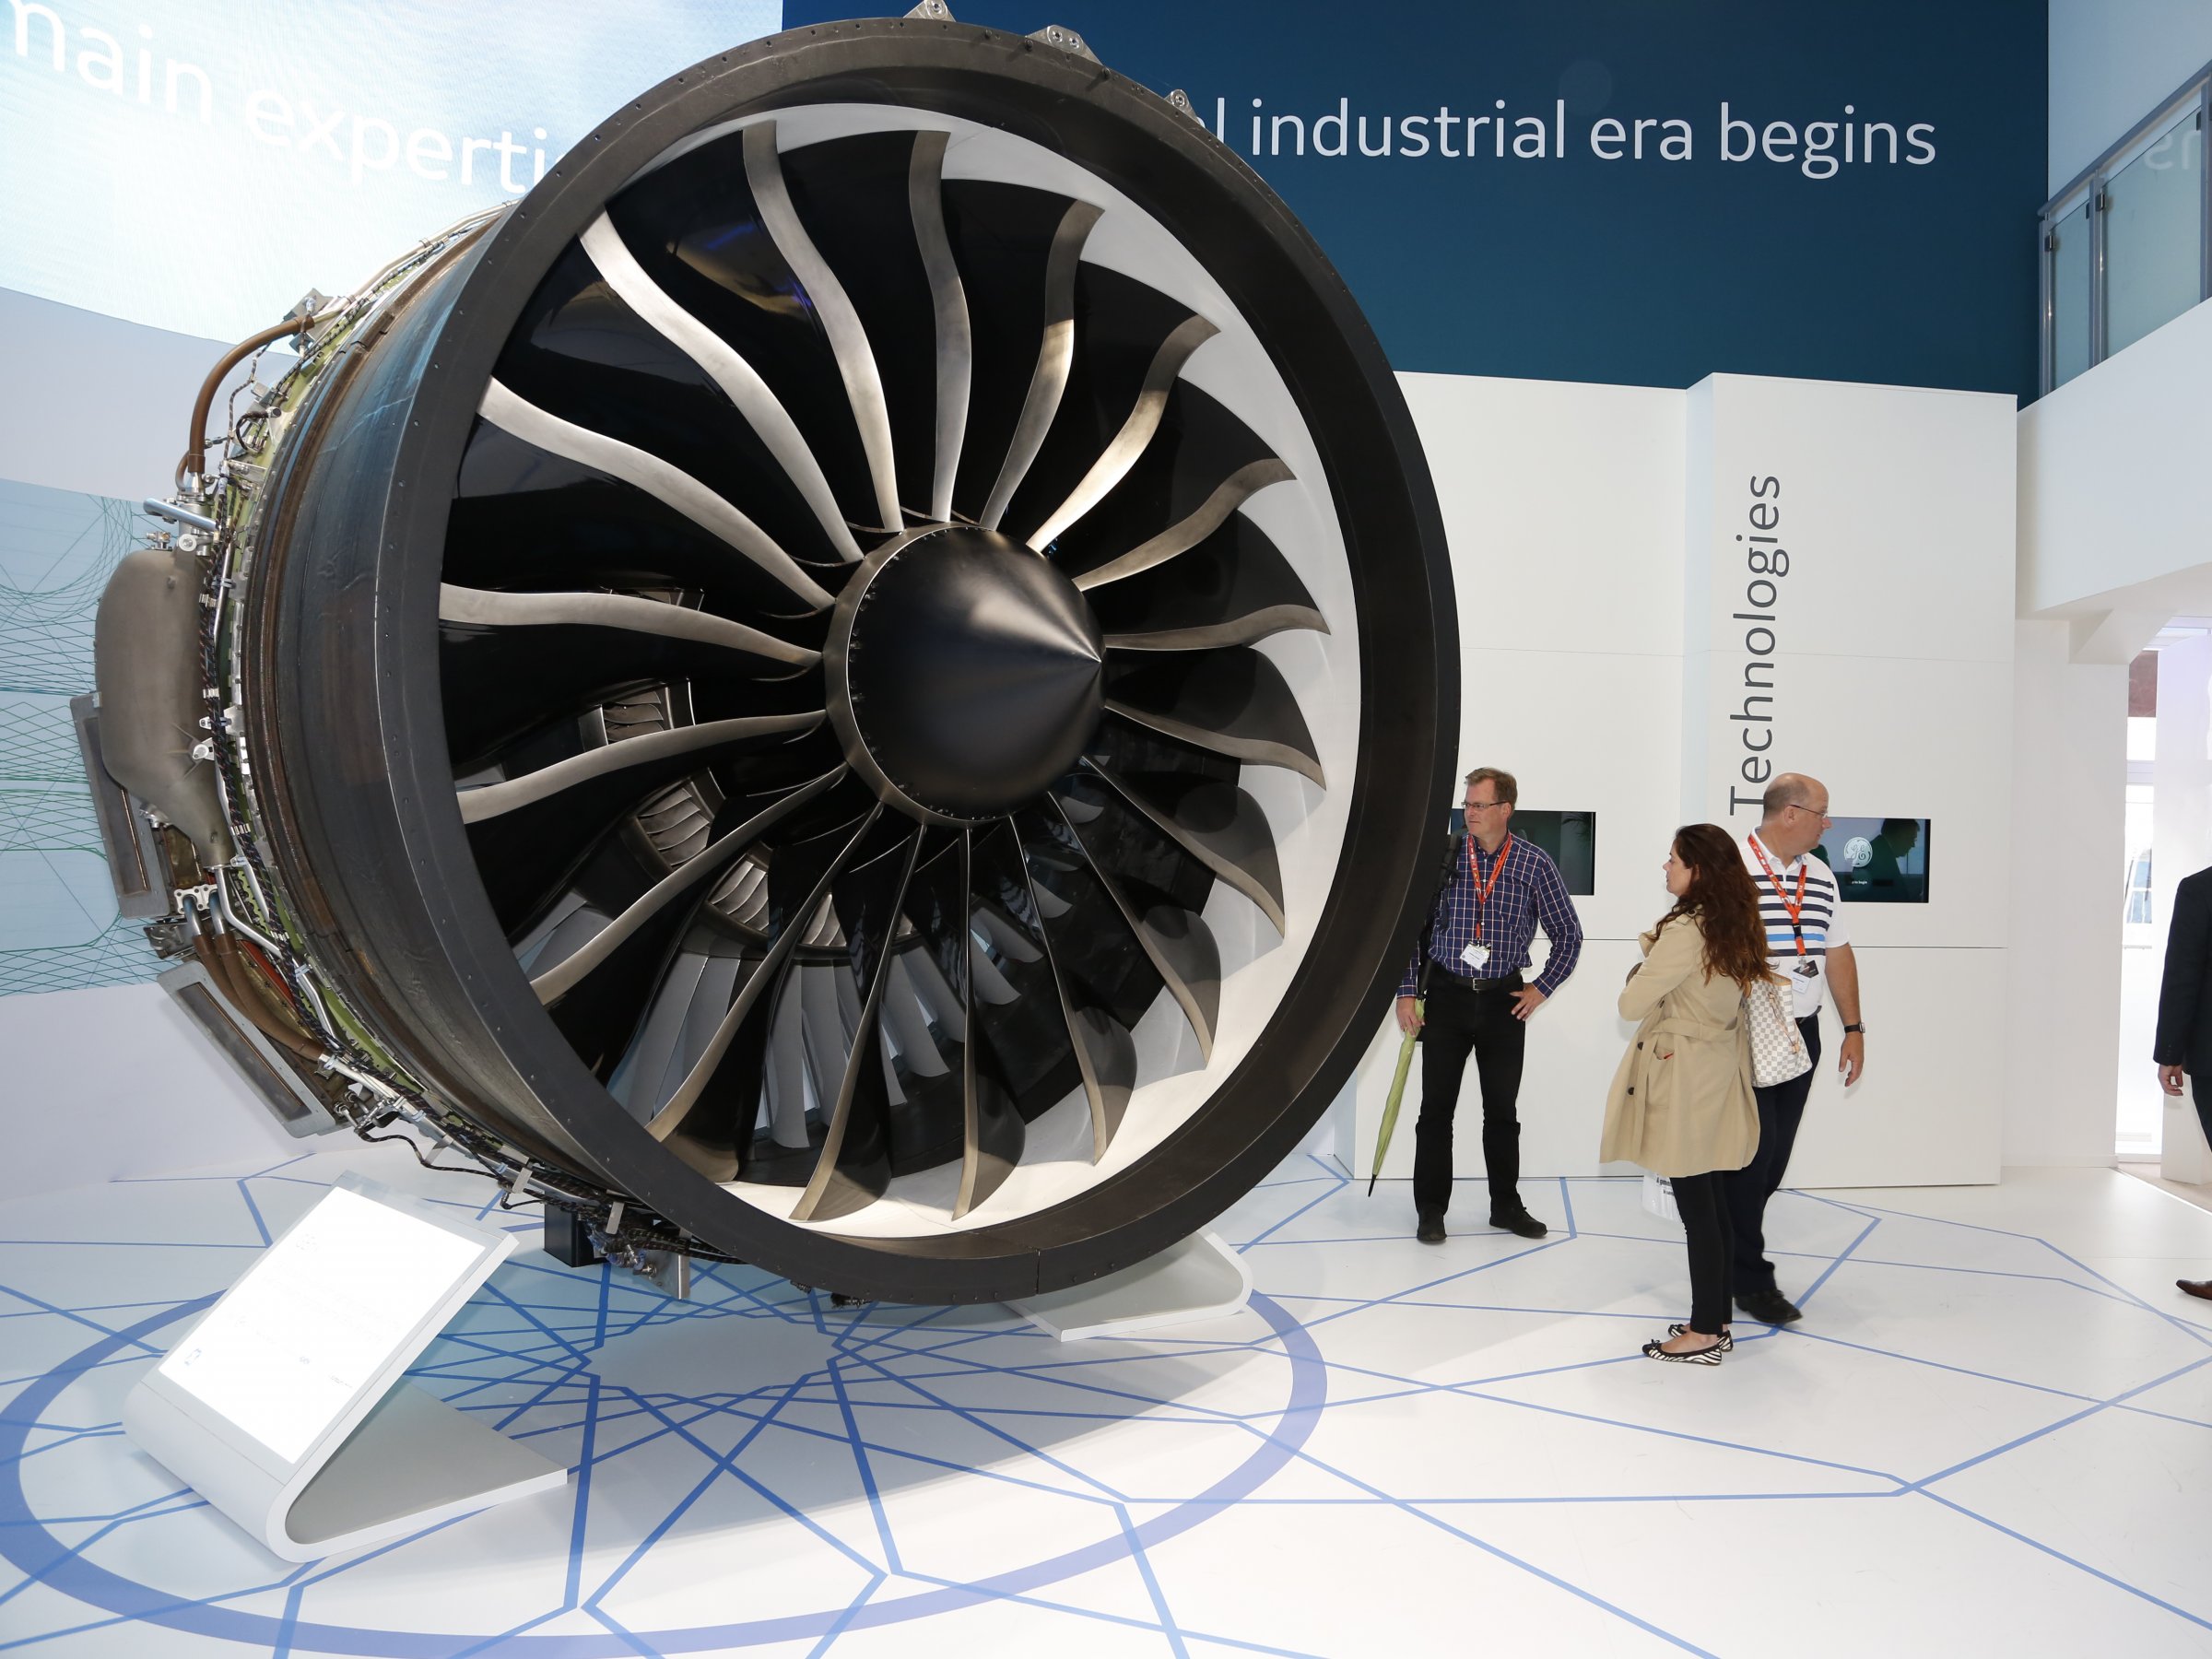 Most powerful jet engines use data - Business Insider